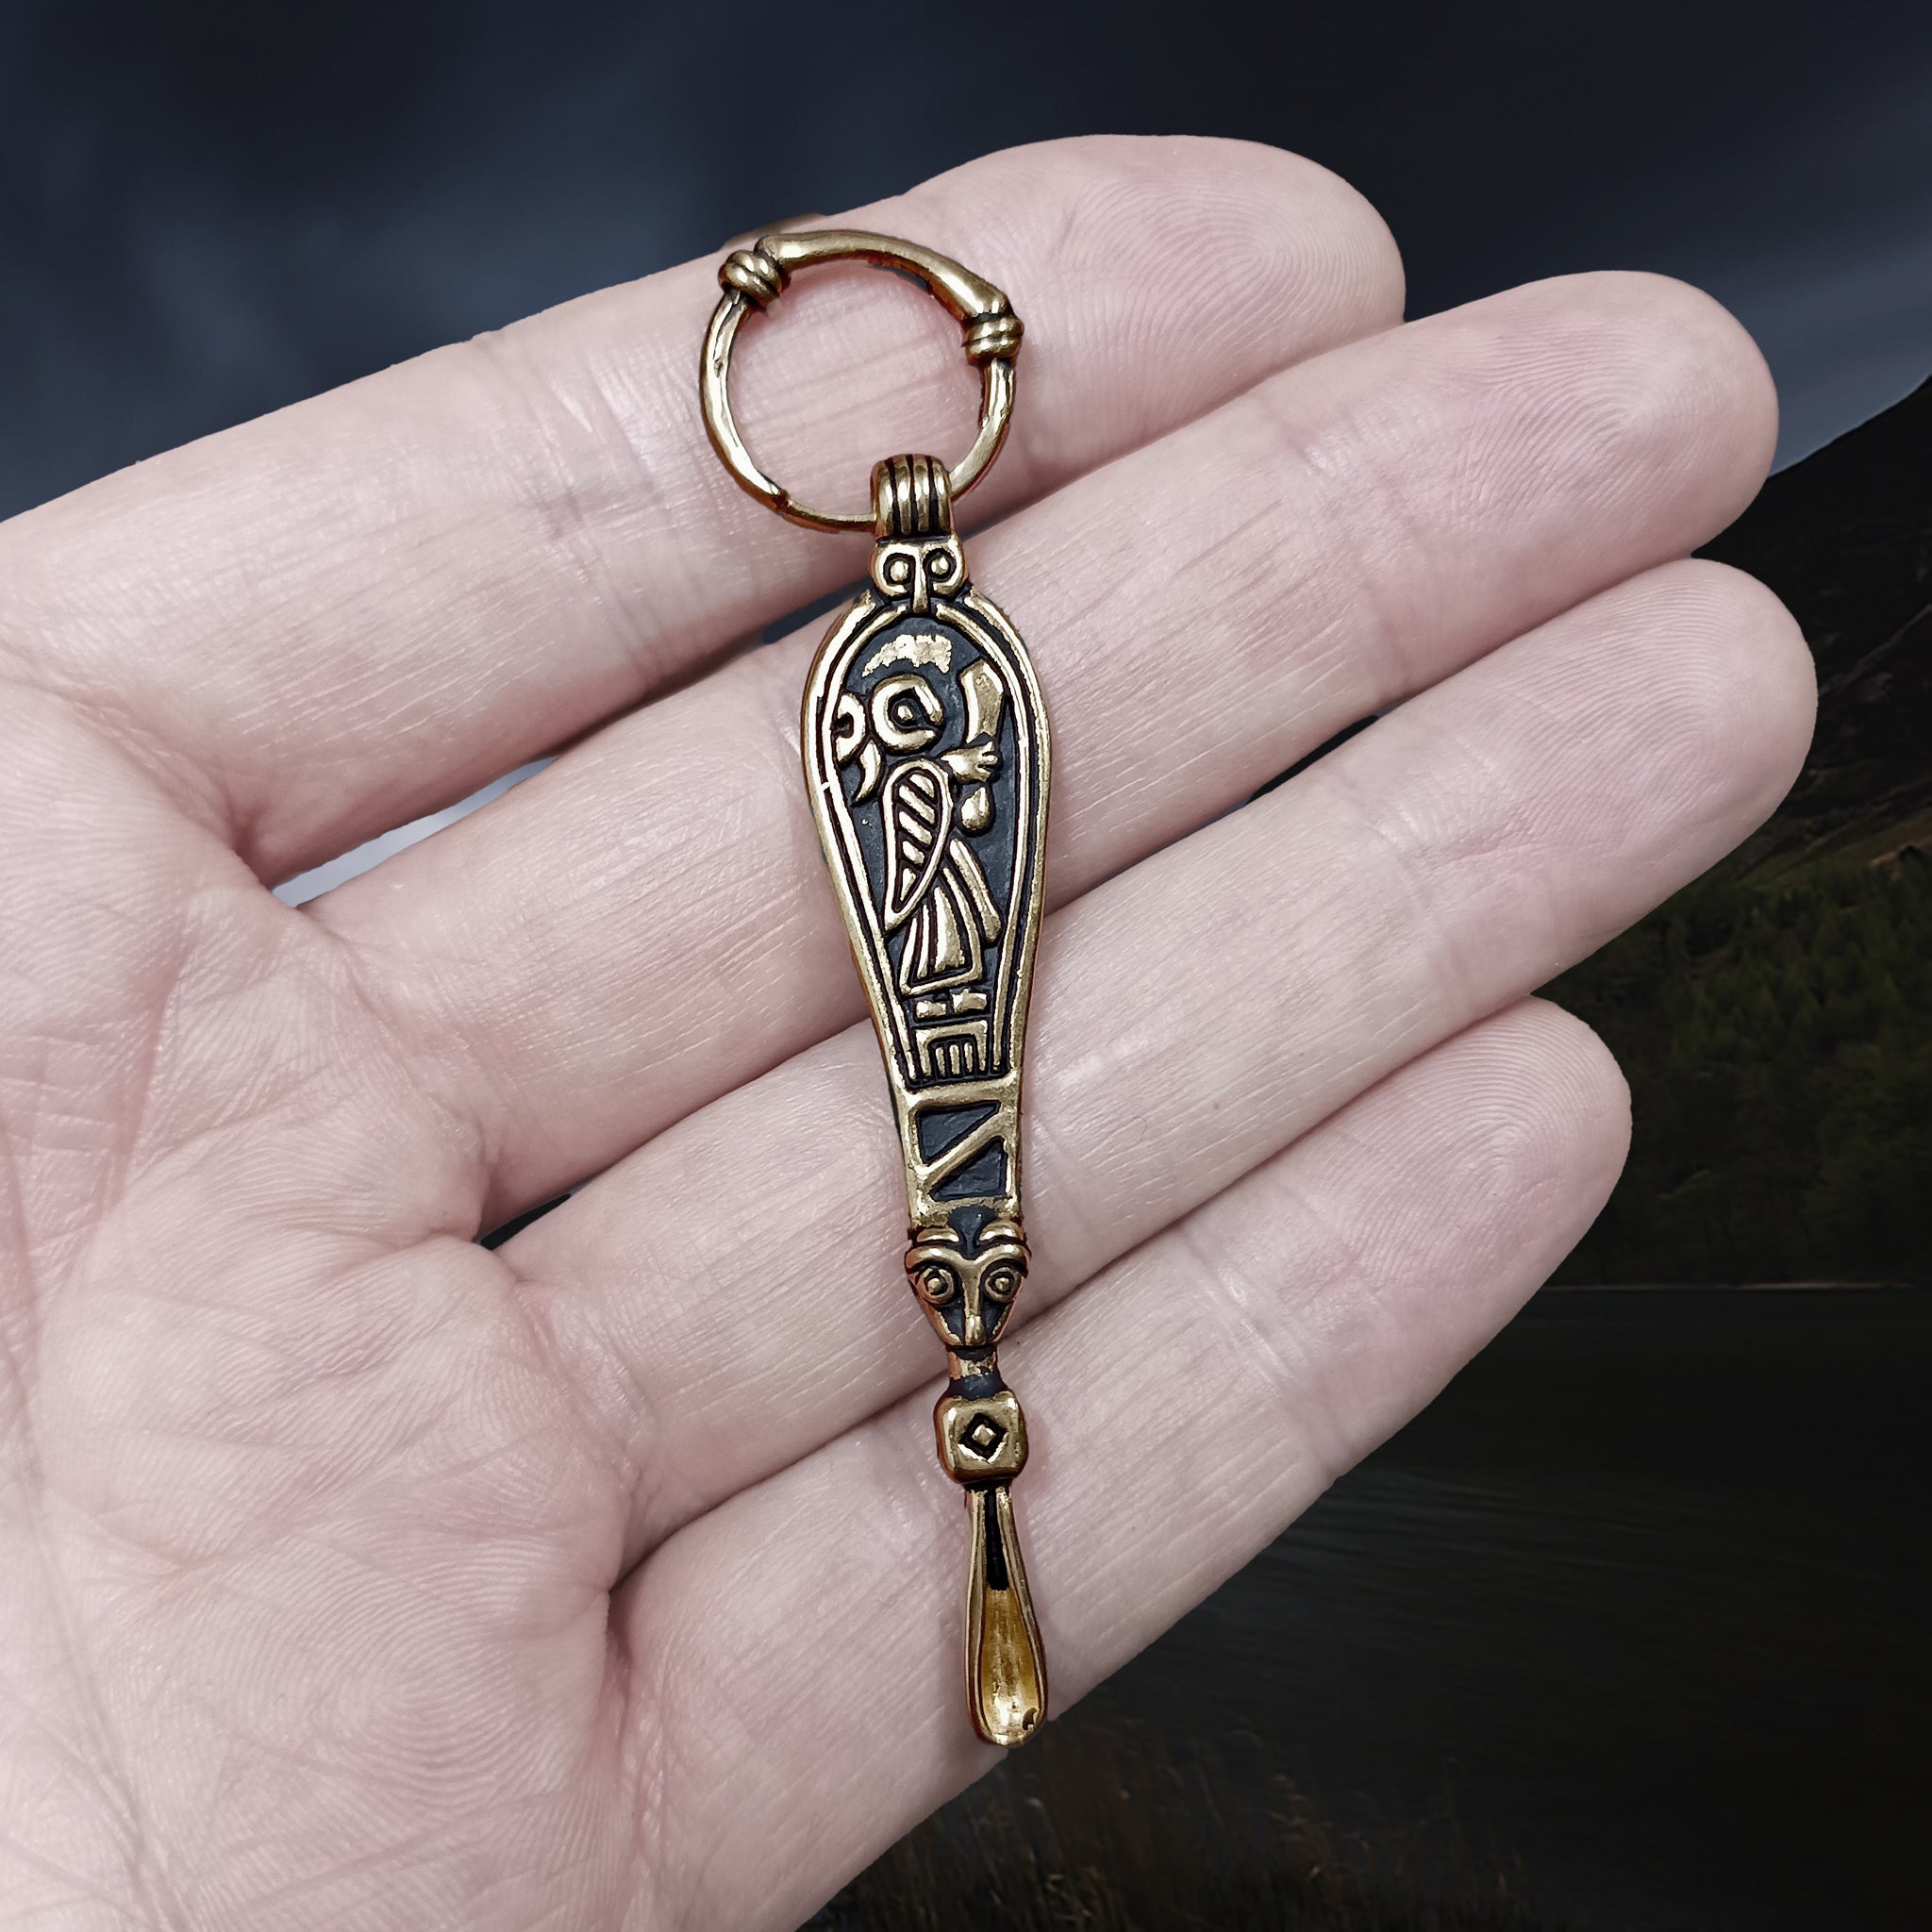 Bronze Ear Spoon Viking Pendant with Ring Hanger & Valkyrie Design on Hand